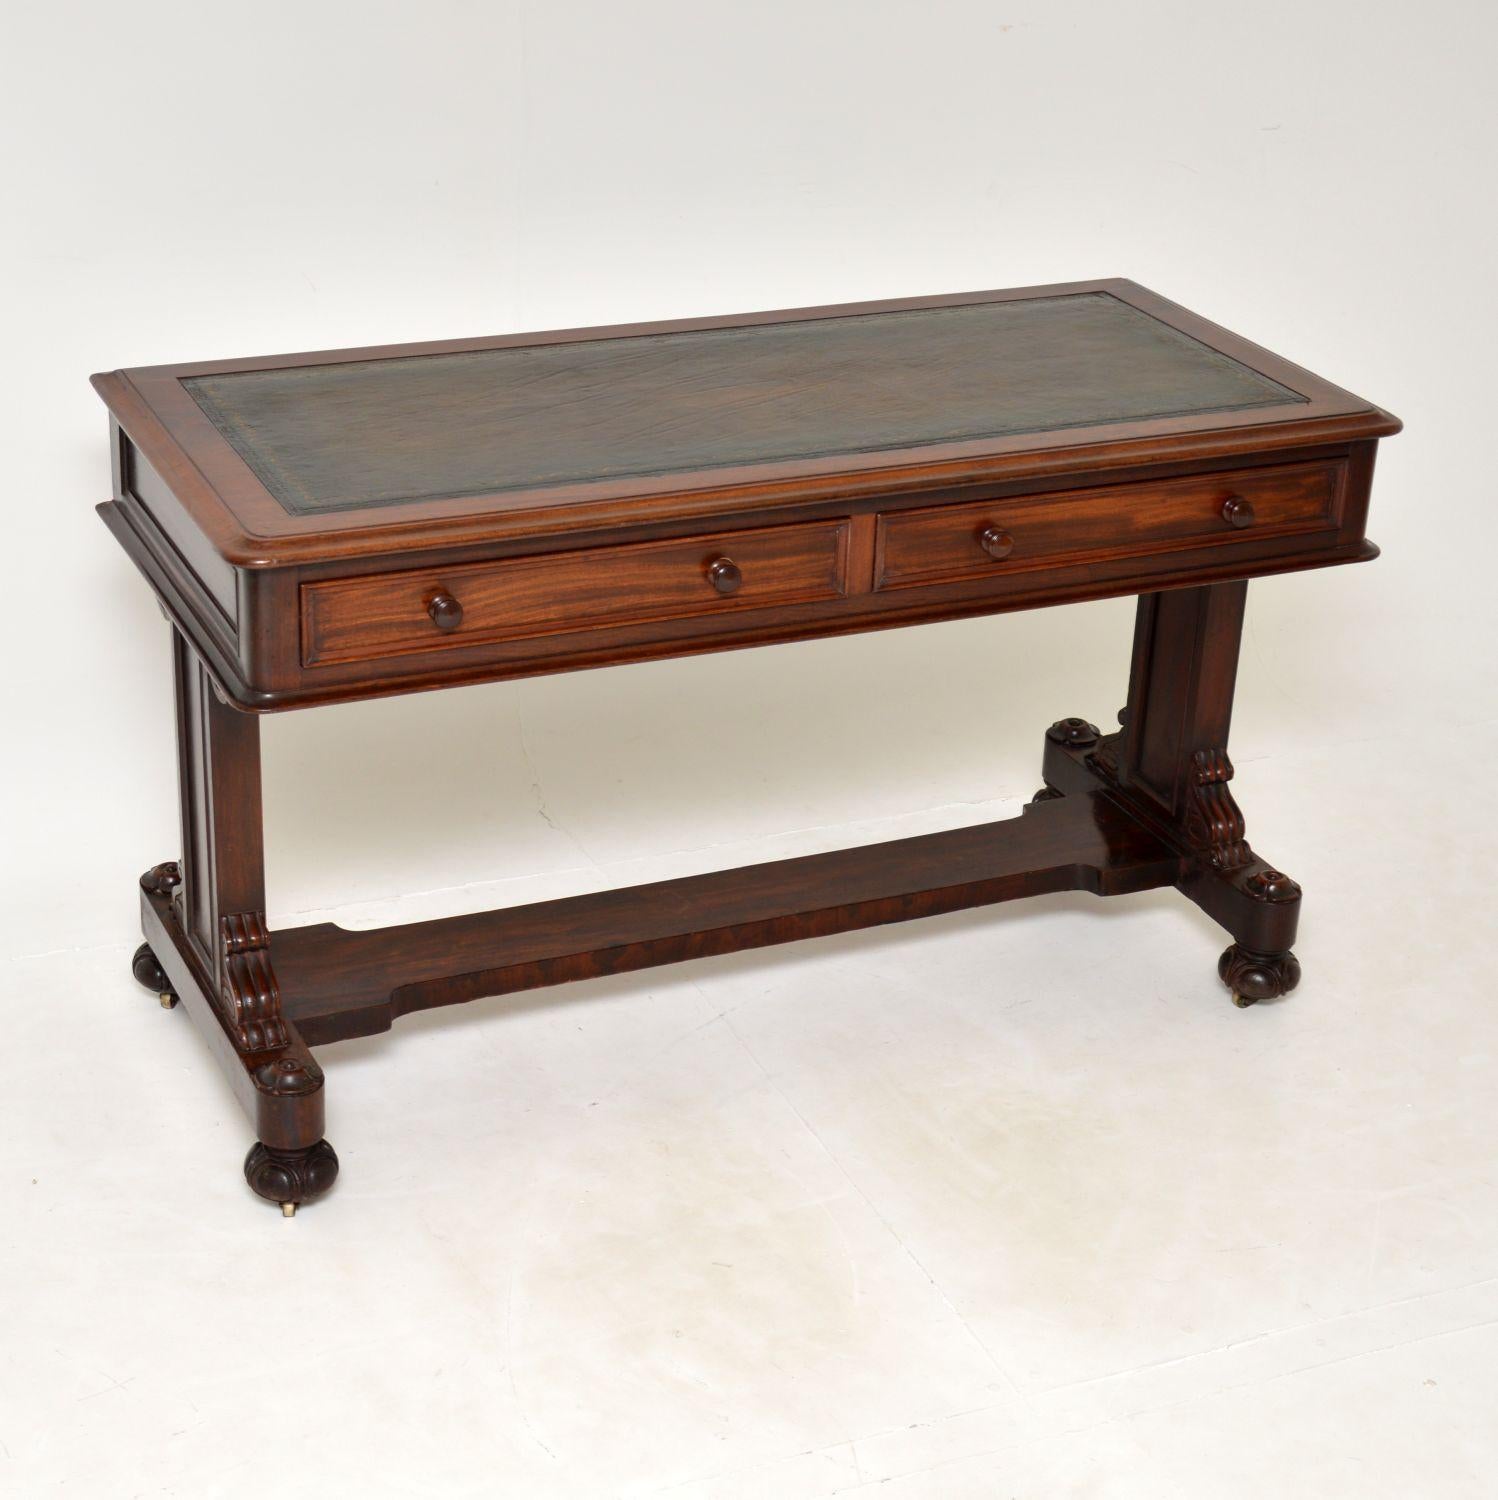 A superb antique William IV period leather top desk. This was made in England, it dates from around the 1830-1840’s period.

It is of excellent quality, it’s very well built with generous proportions & has a beautiful hand coloured, gold tooled